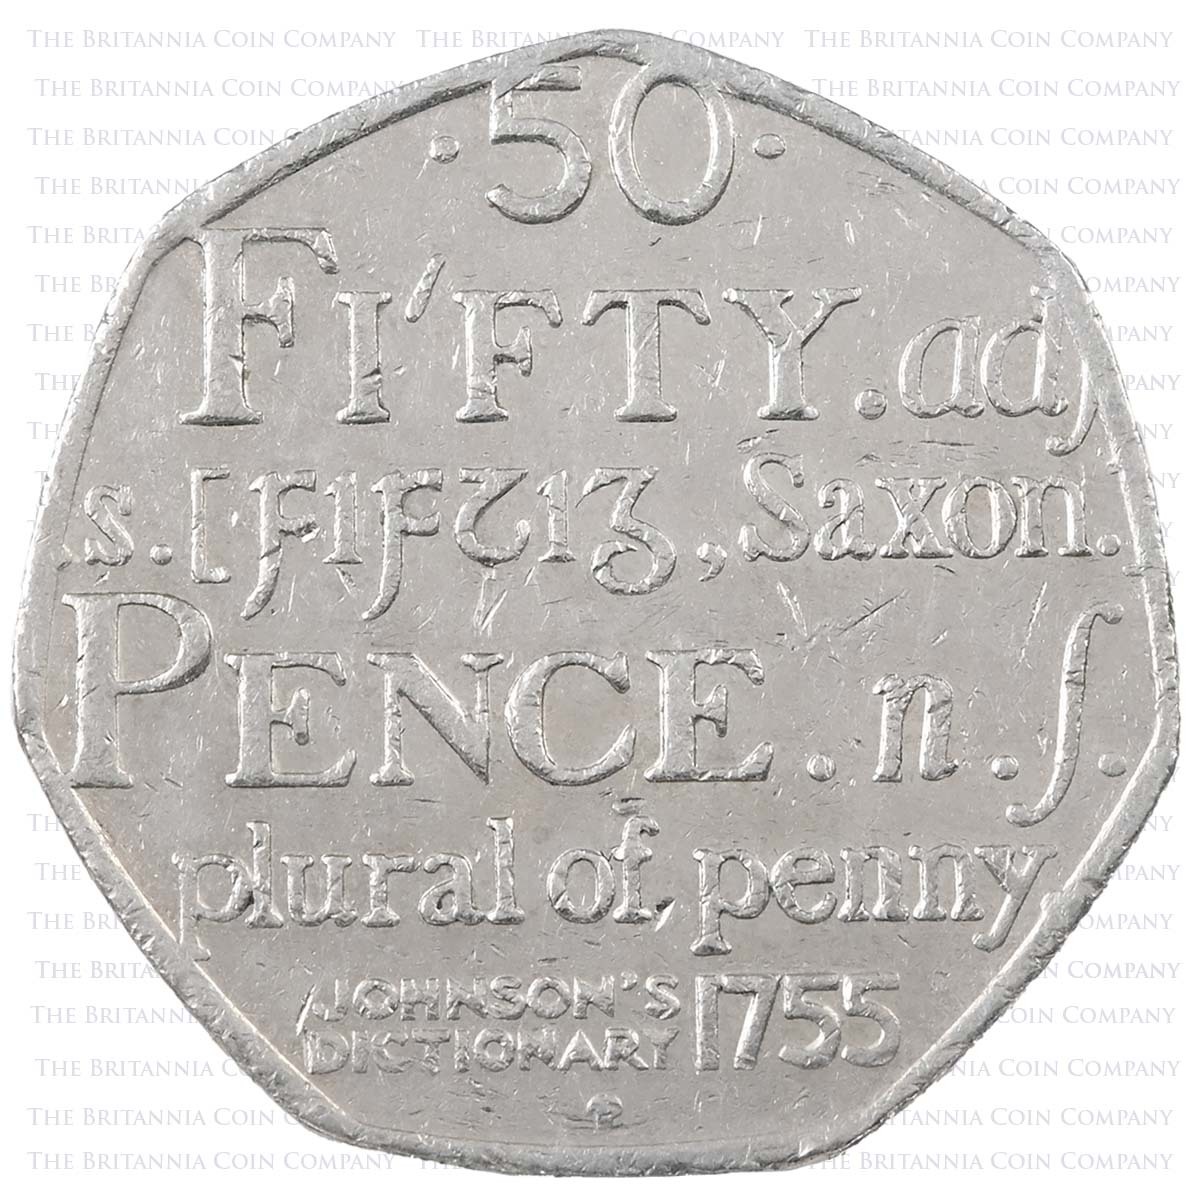 2005 Samuel Johnson's Dictionary Circulated Fifty Pence Coin Reverse